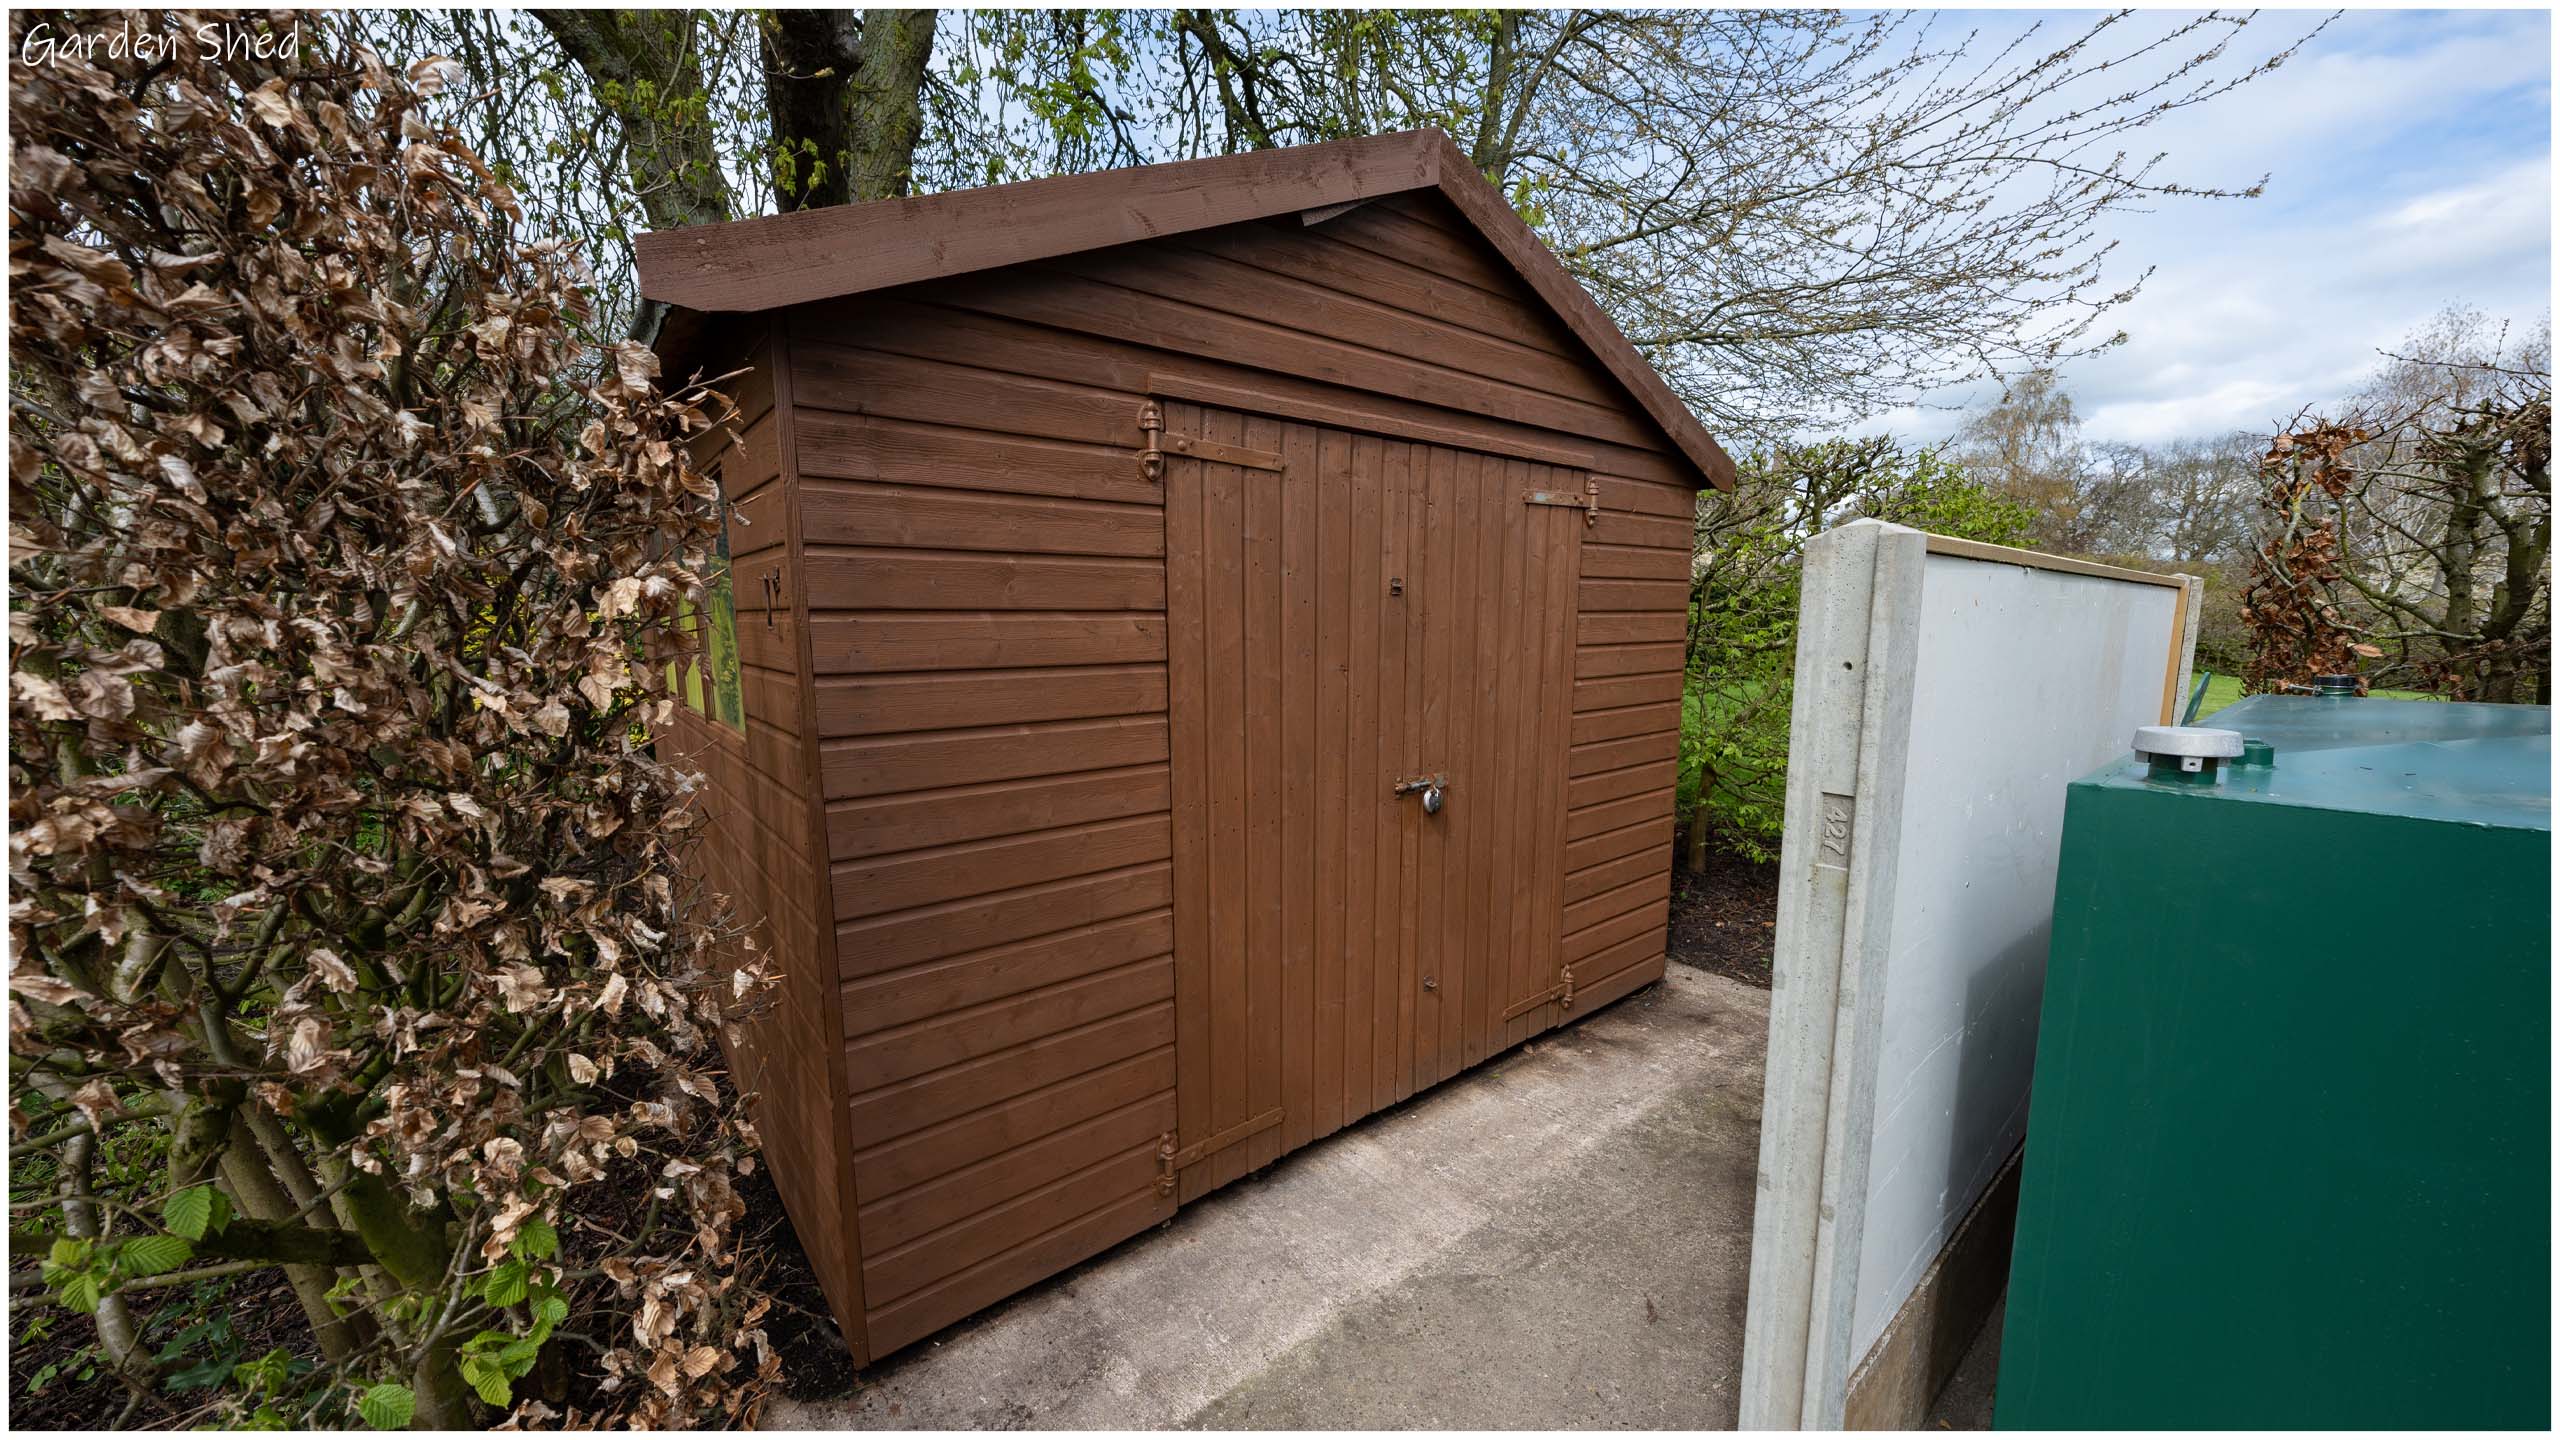 Harry's House, Garden Shed